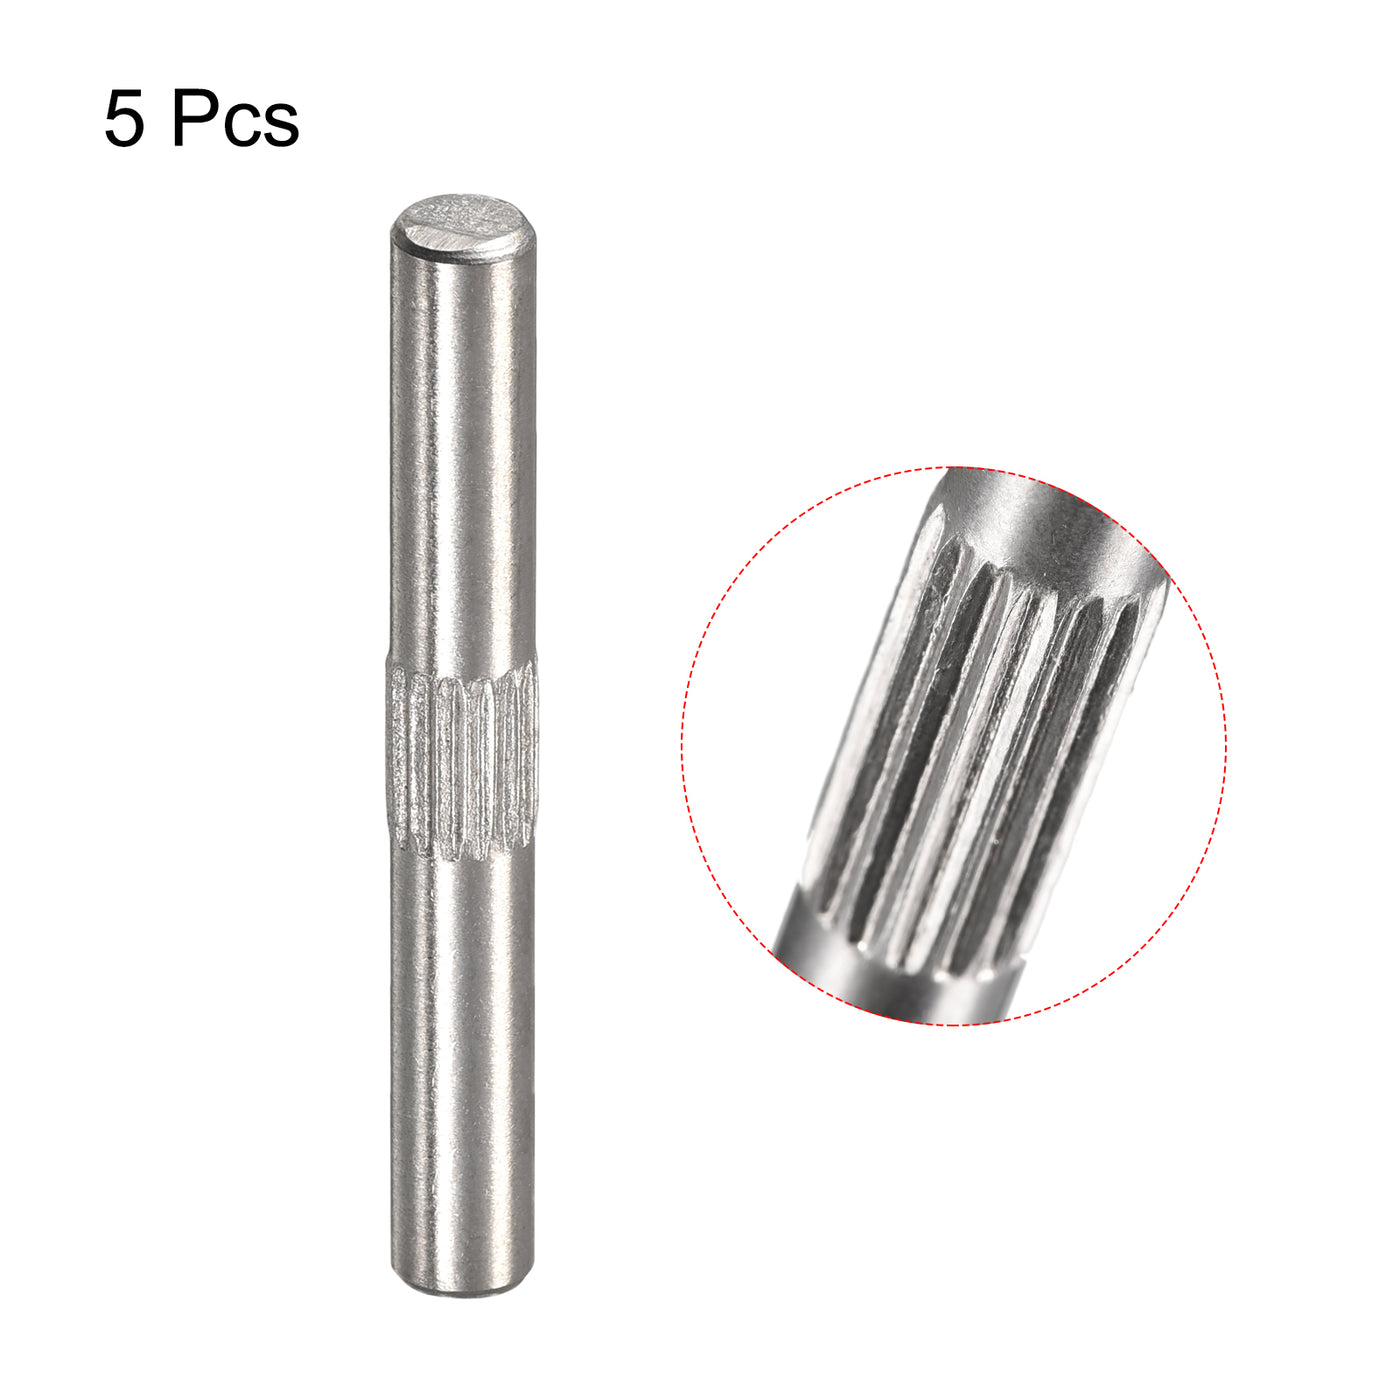 uxcell Uxcell 4x35mm 304 Stainless Steel Dowel Pins, 5Pcs Center Knurled Chamfered End Pin